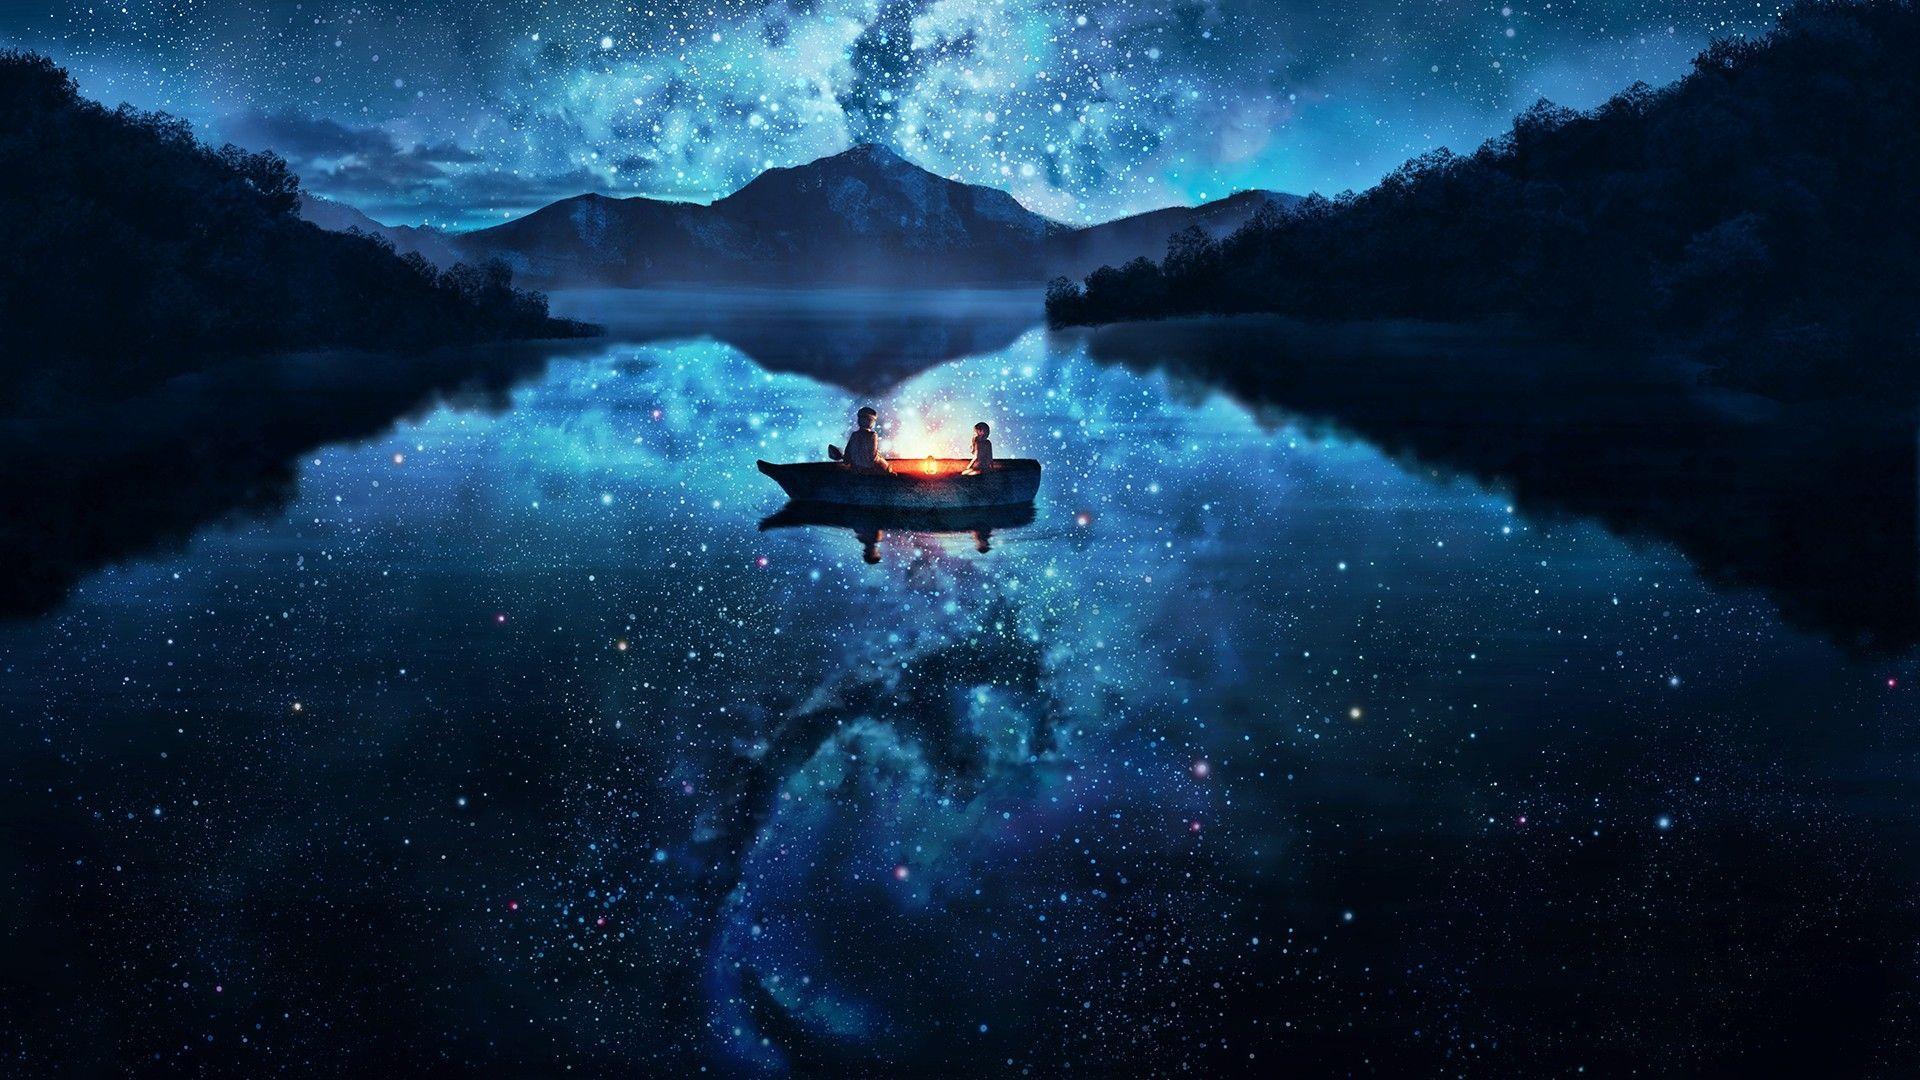 Download A Lake With A Starry Sky Wallpaper | Wallpapers.com